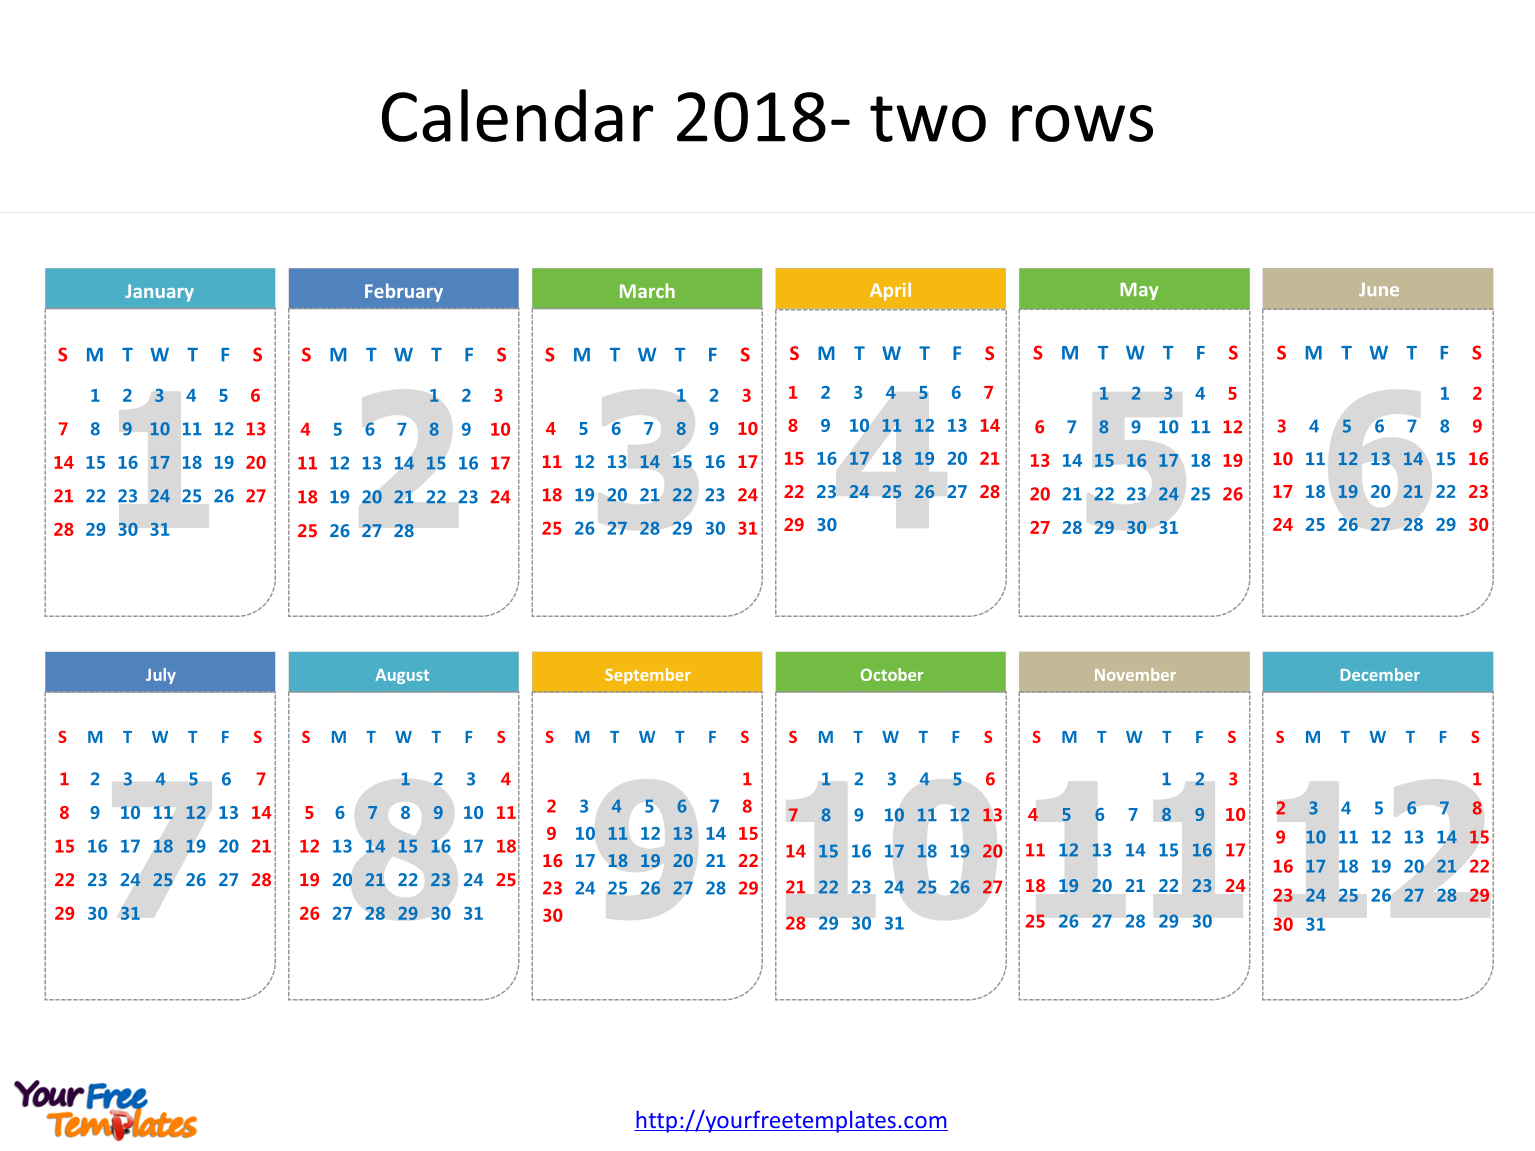 2018 Calendar template with dates of six months in it